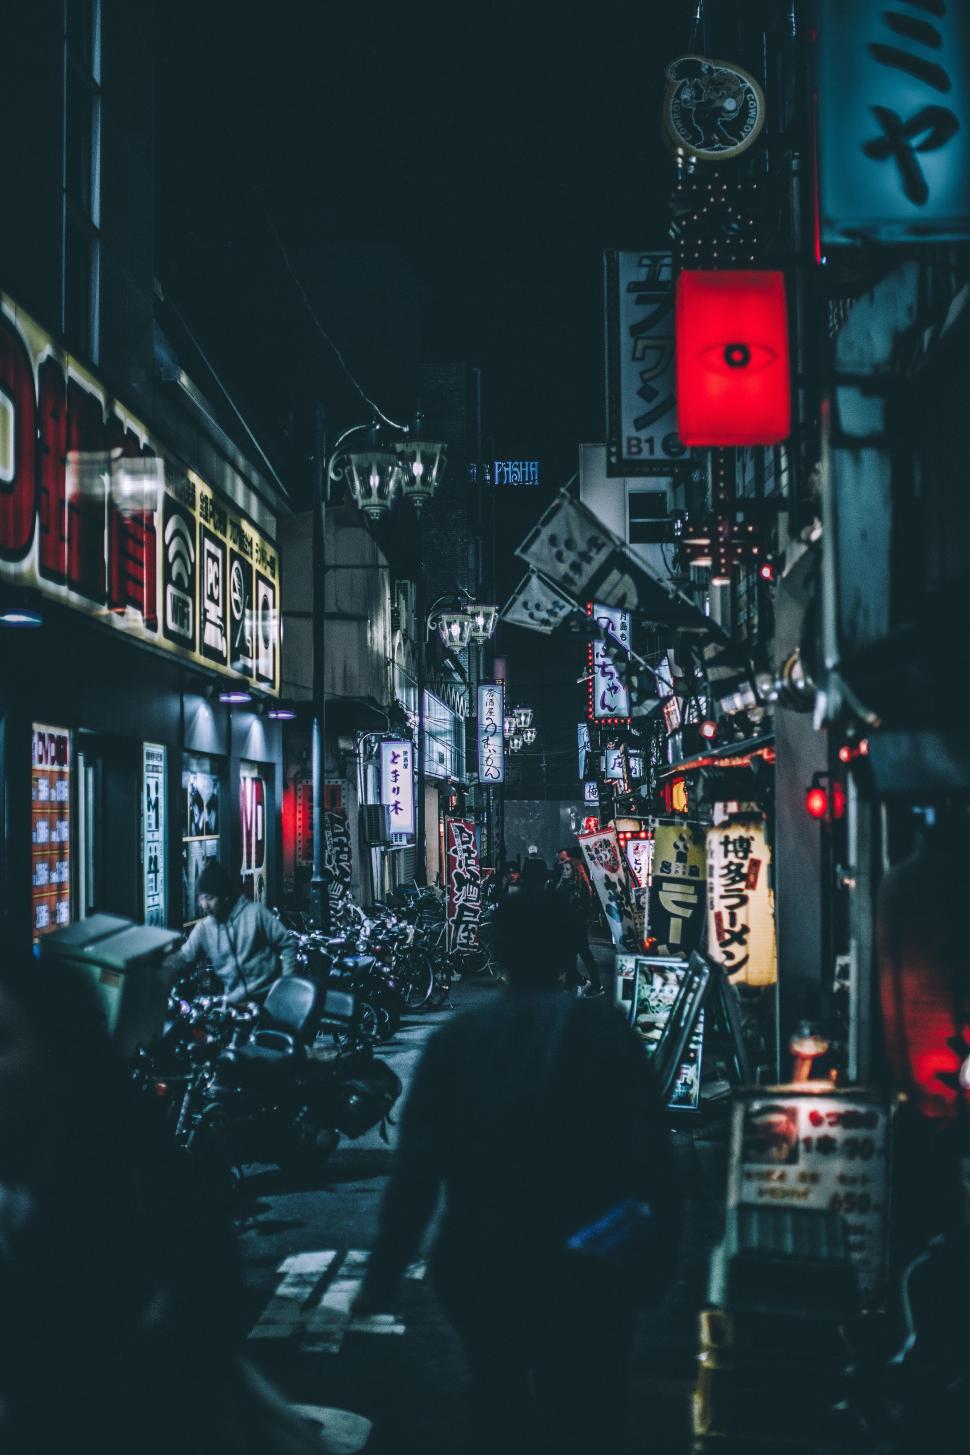 Free Image of Group of People Walking Down a Street at Night 